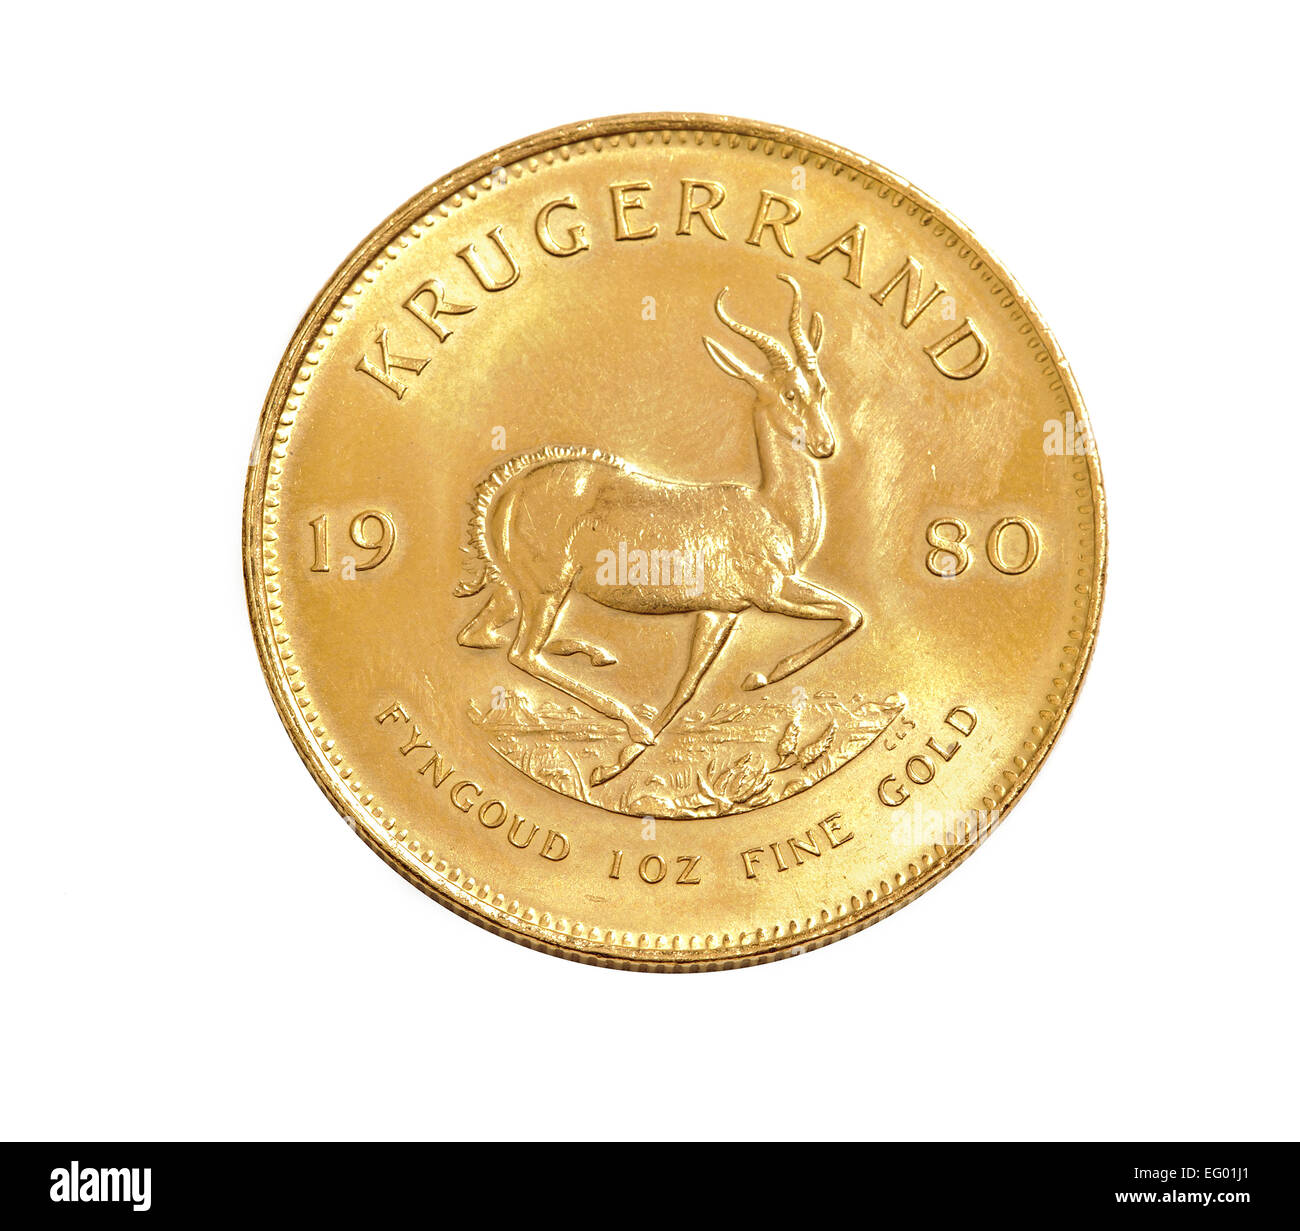 22 caret gold Krugerrand coin on white background Stock Photo